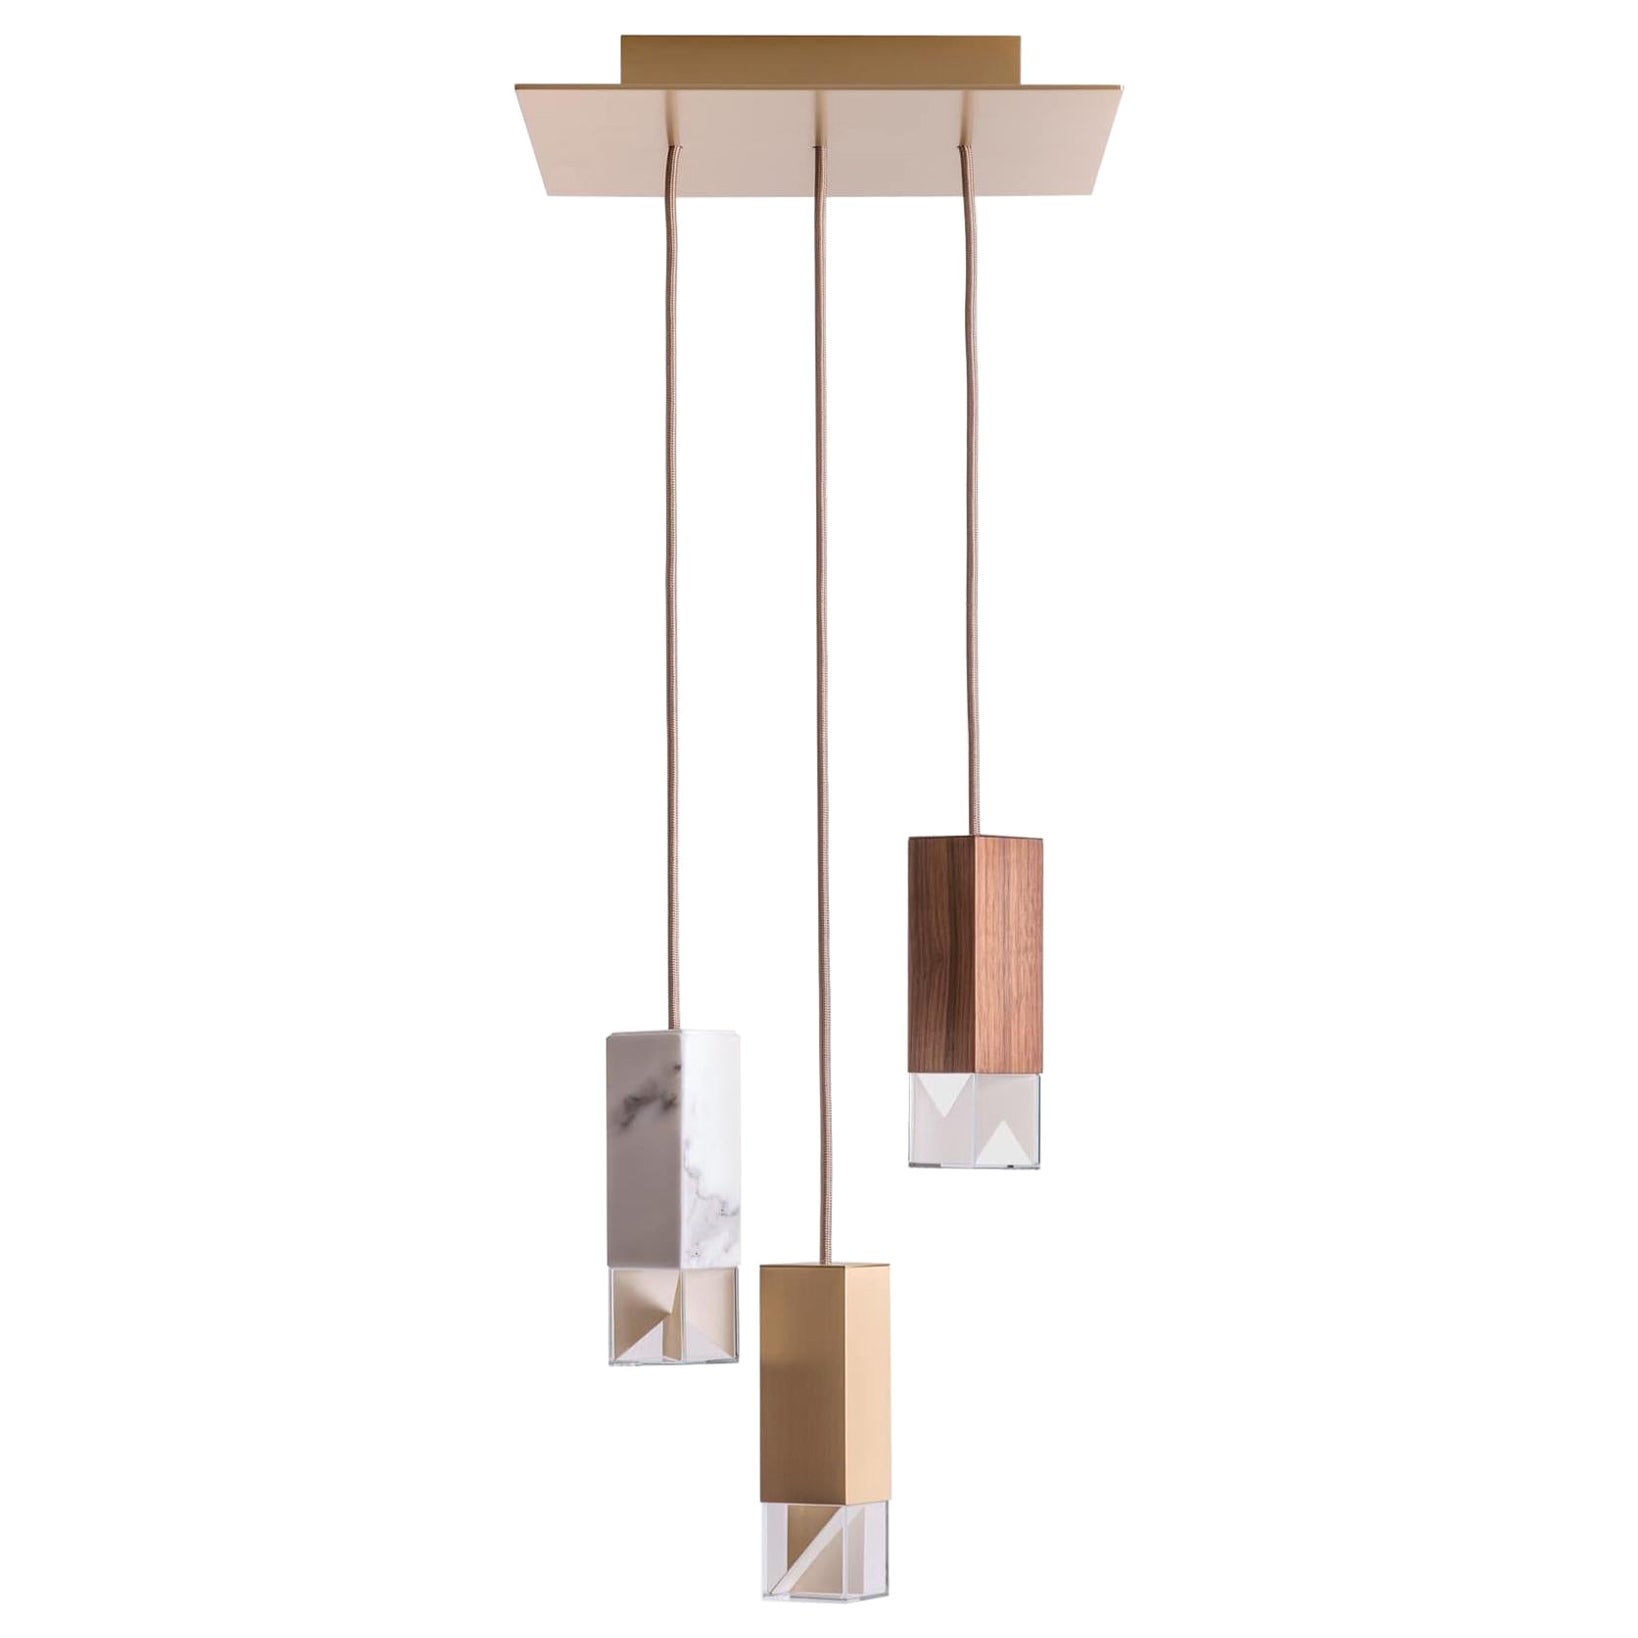 Lamp One Collection Chandelier by Formaminima